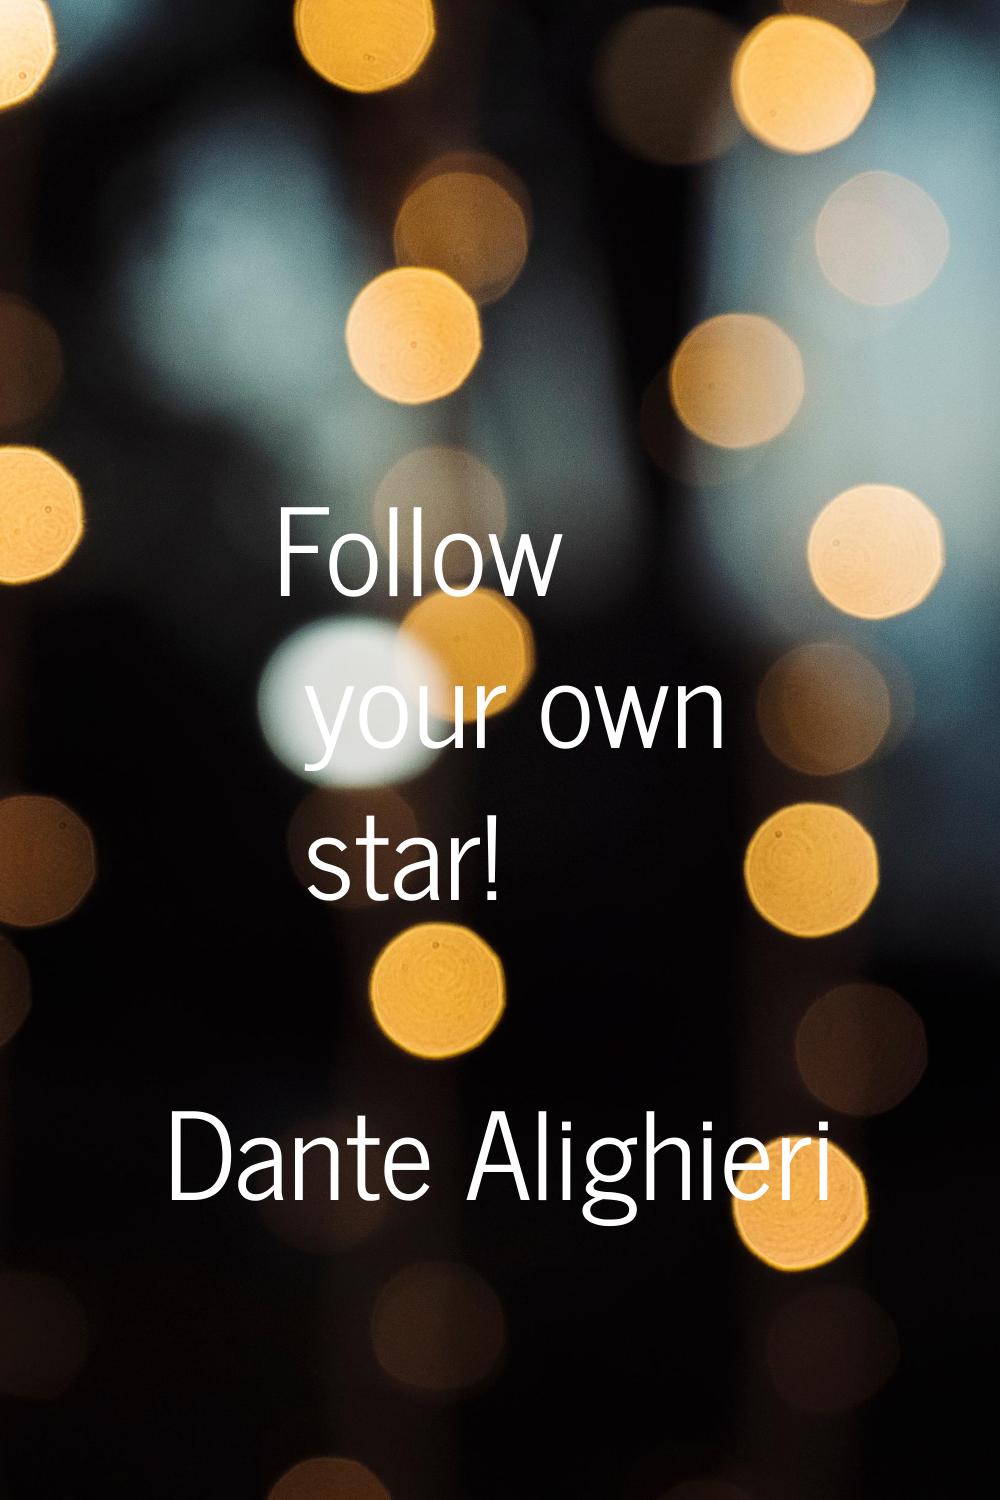 Follow your own star!